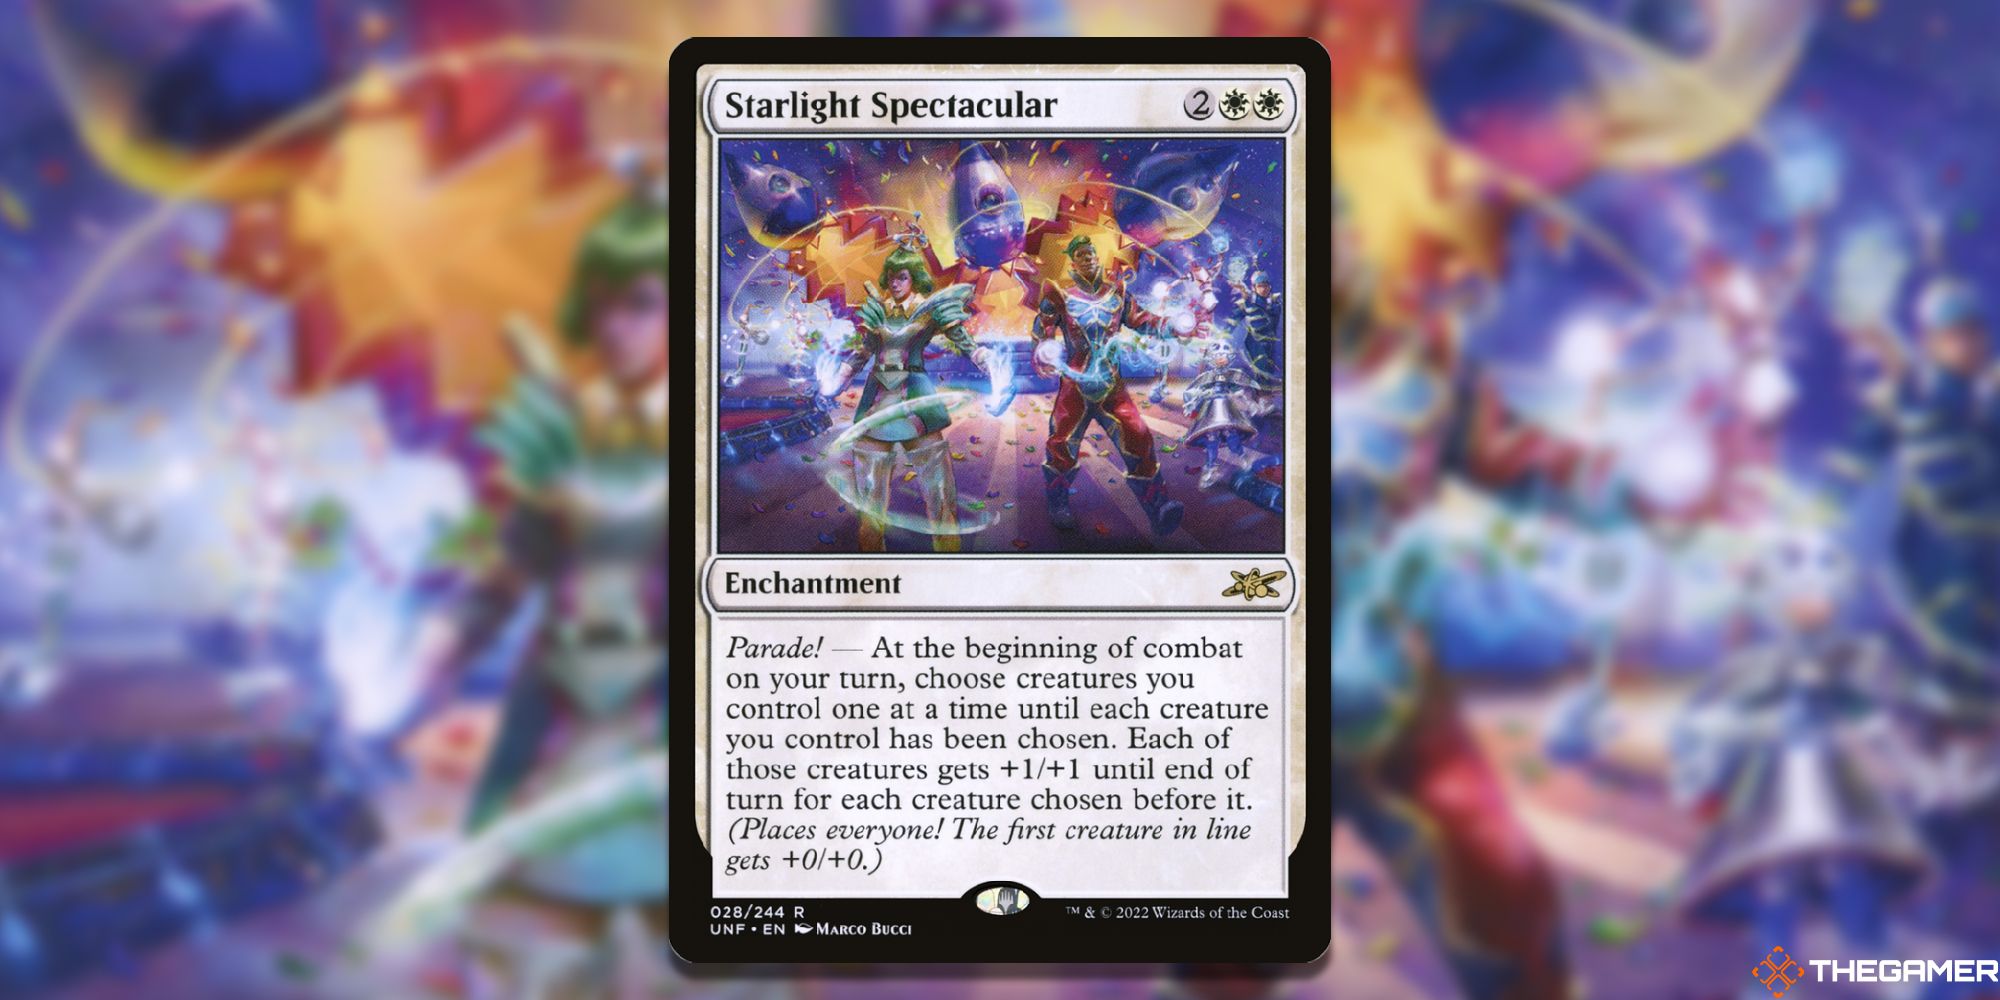 Image of the Starlight Spectacular card in Magic: The Gathering, with art by Marco Bucci